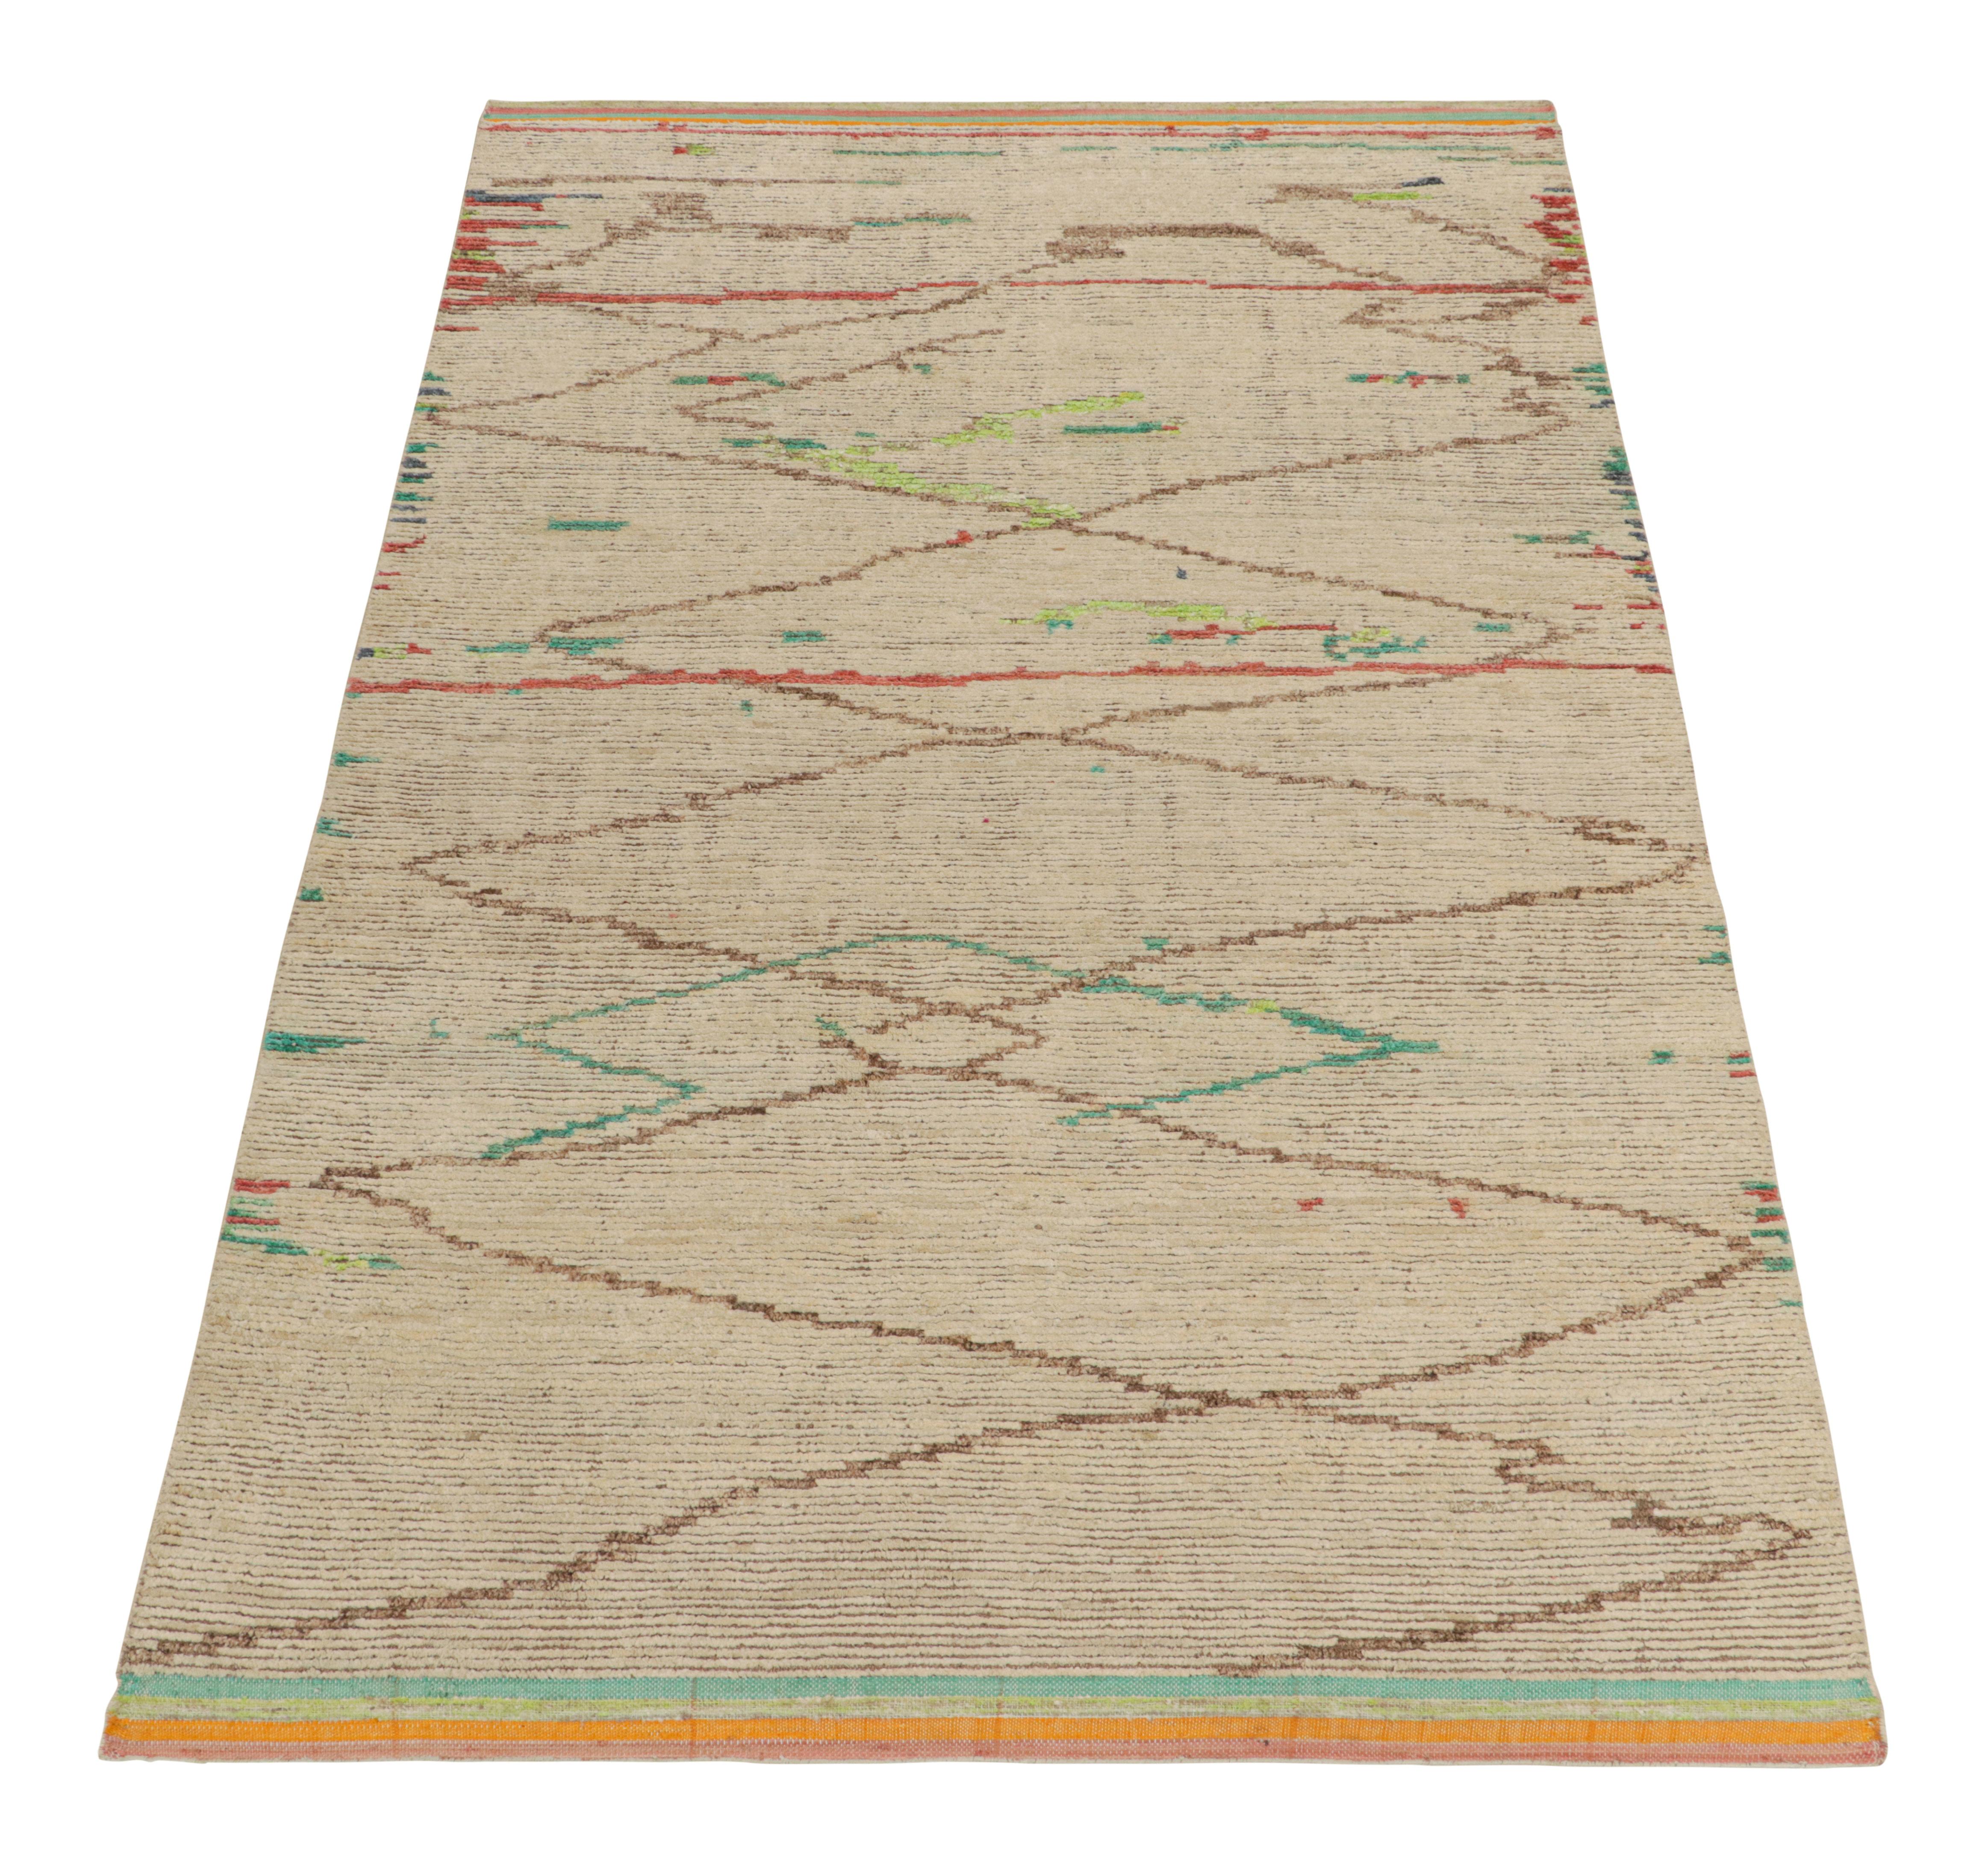 Tribal Rug & Kilim’s Moroccan style rug in Beige-Brown, Red and Green Geometric Pattern For Sale